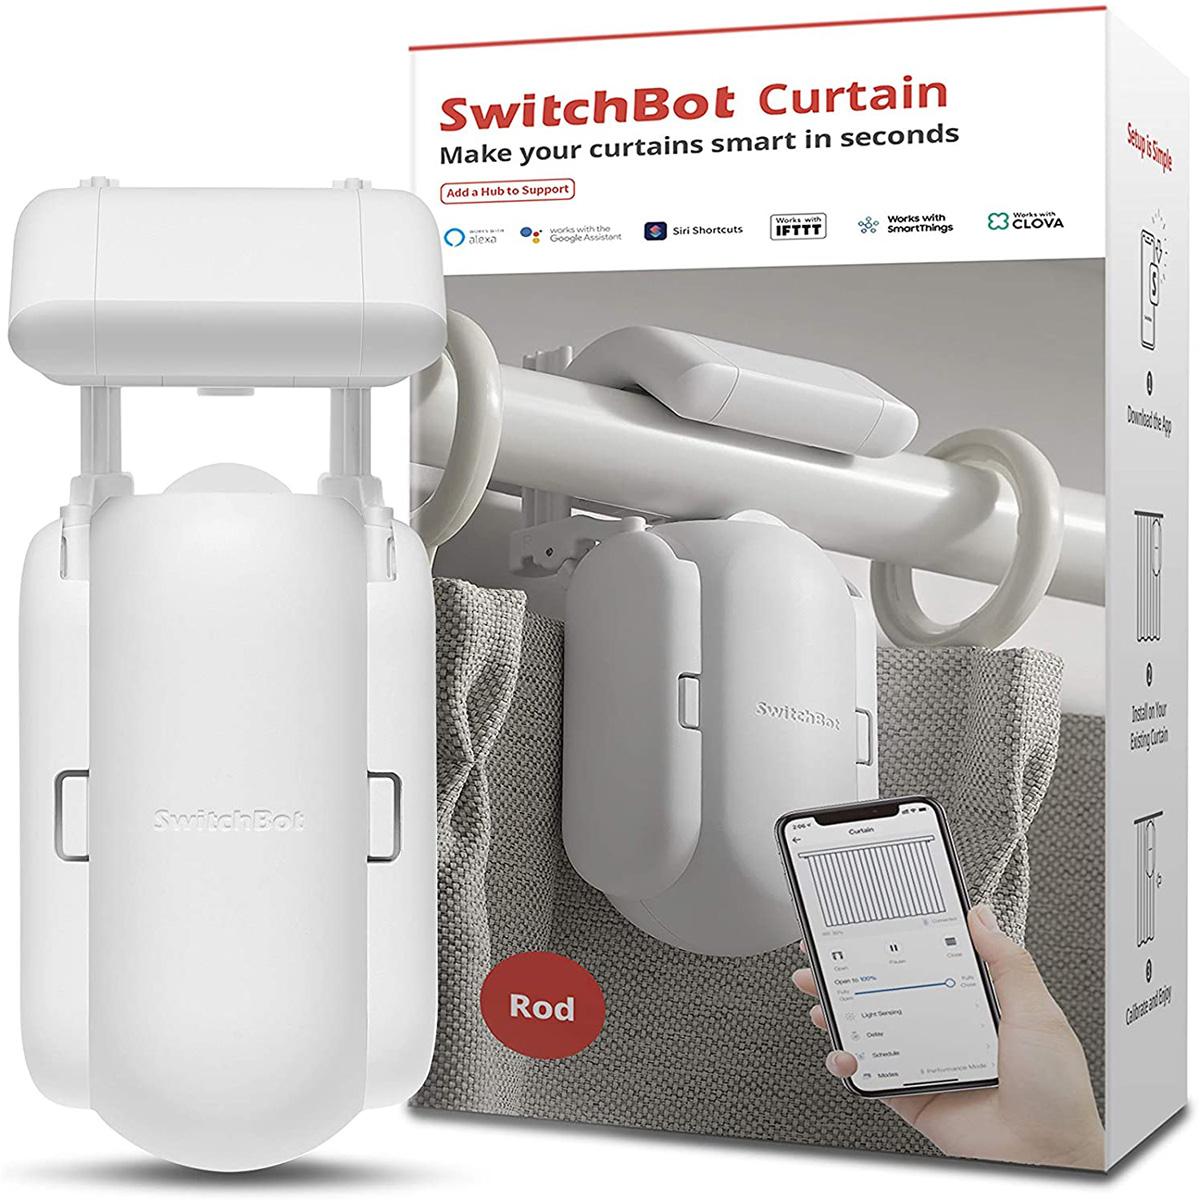 SwitchBot Curtain Smart Electric Motor with Solar Panel for $85.45 Shipped